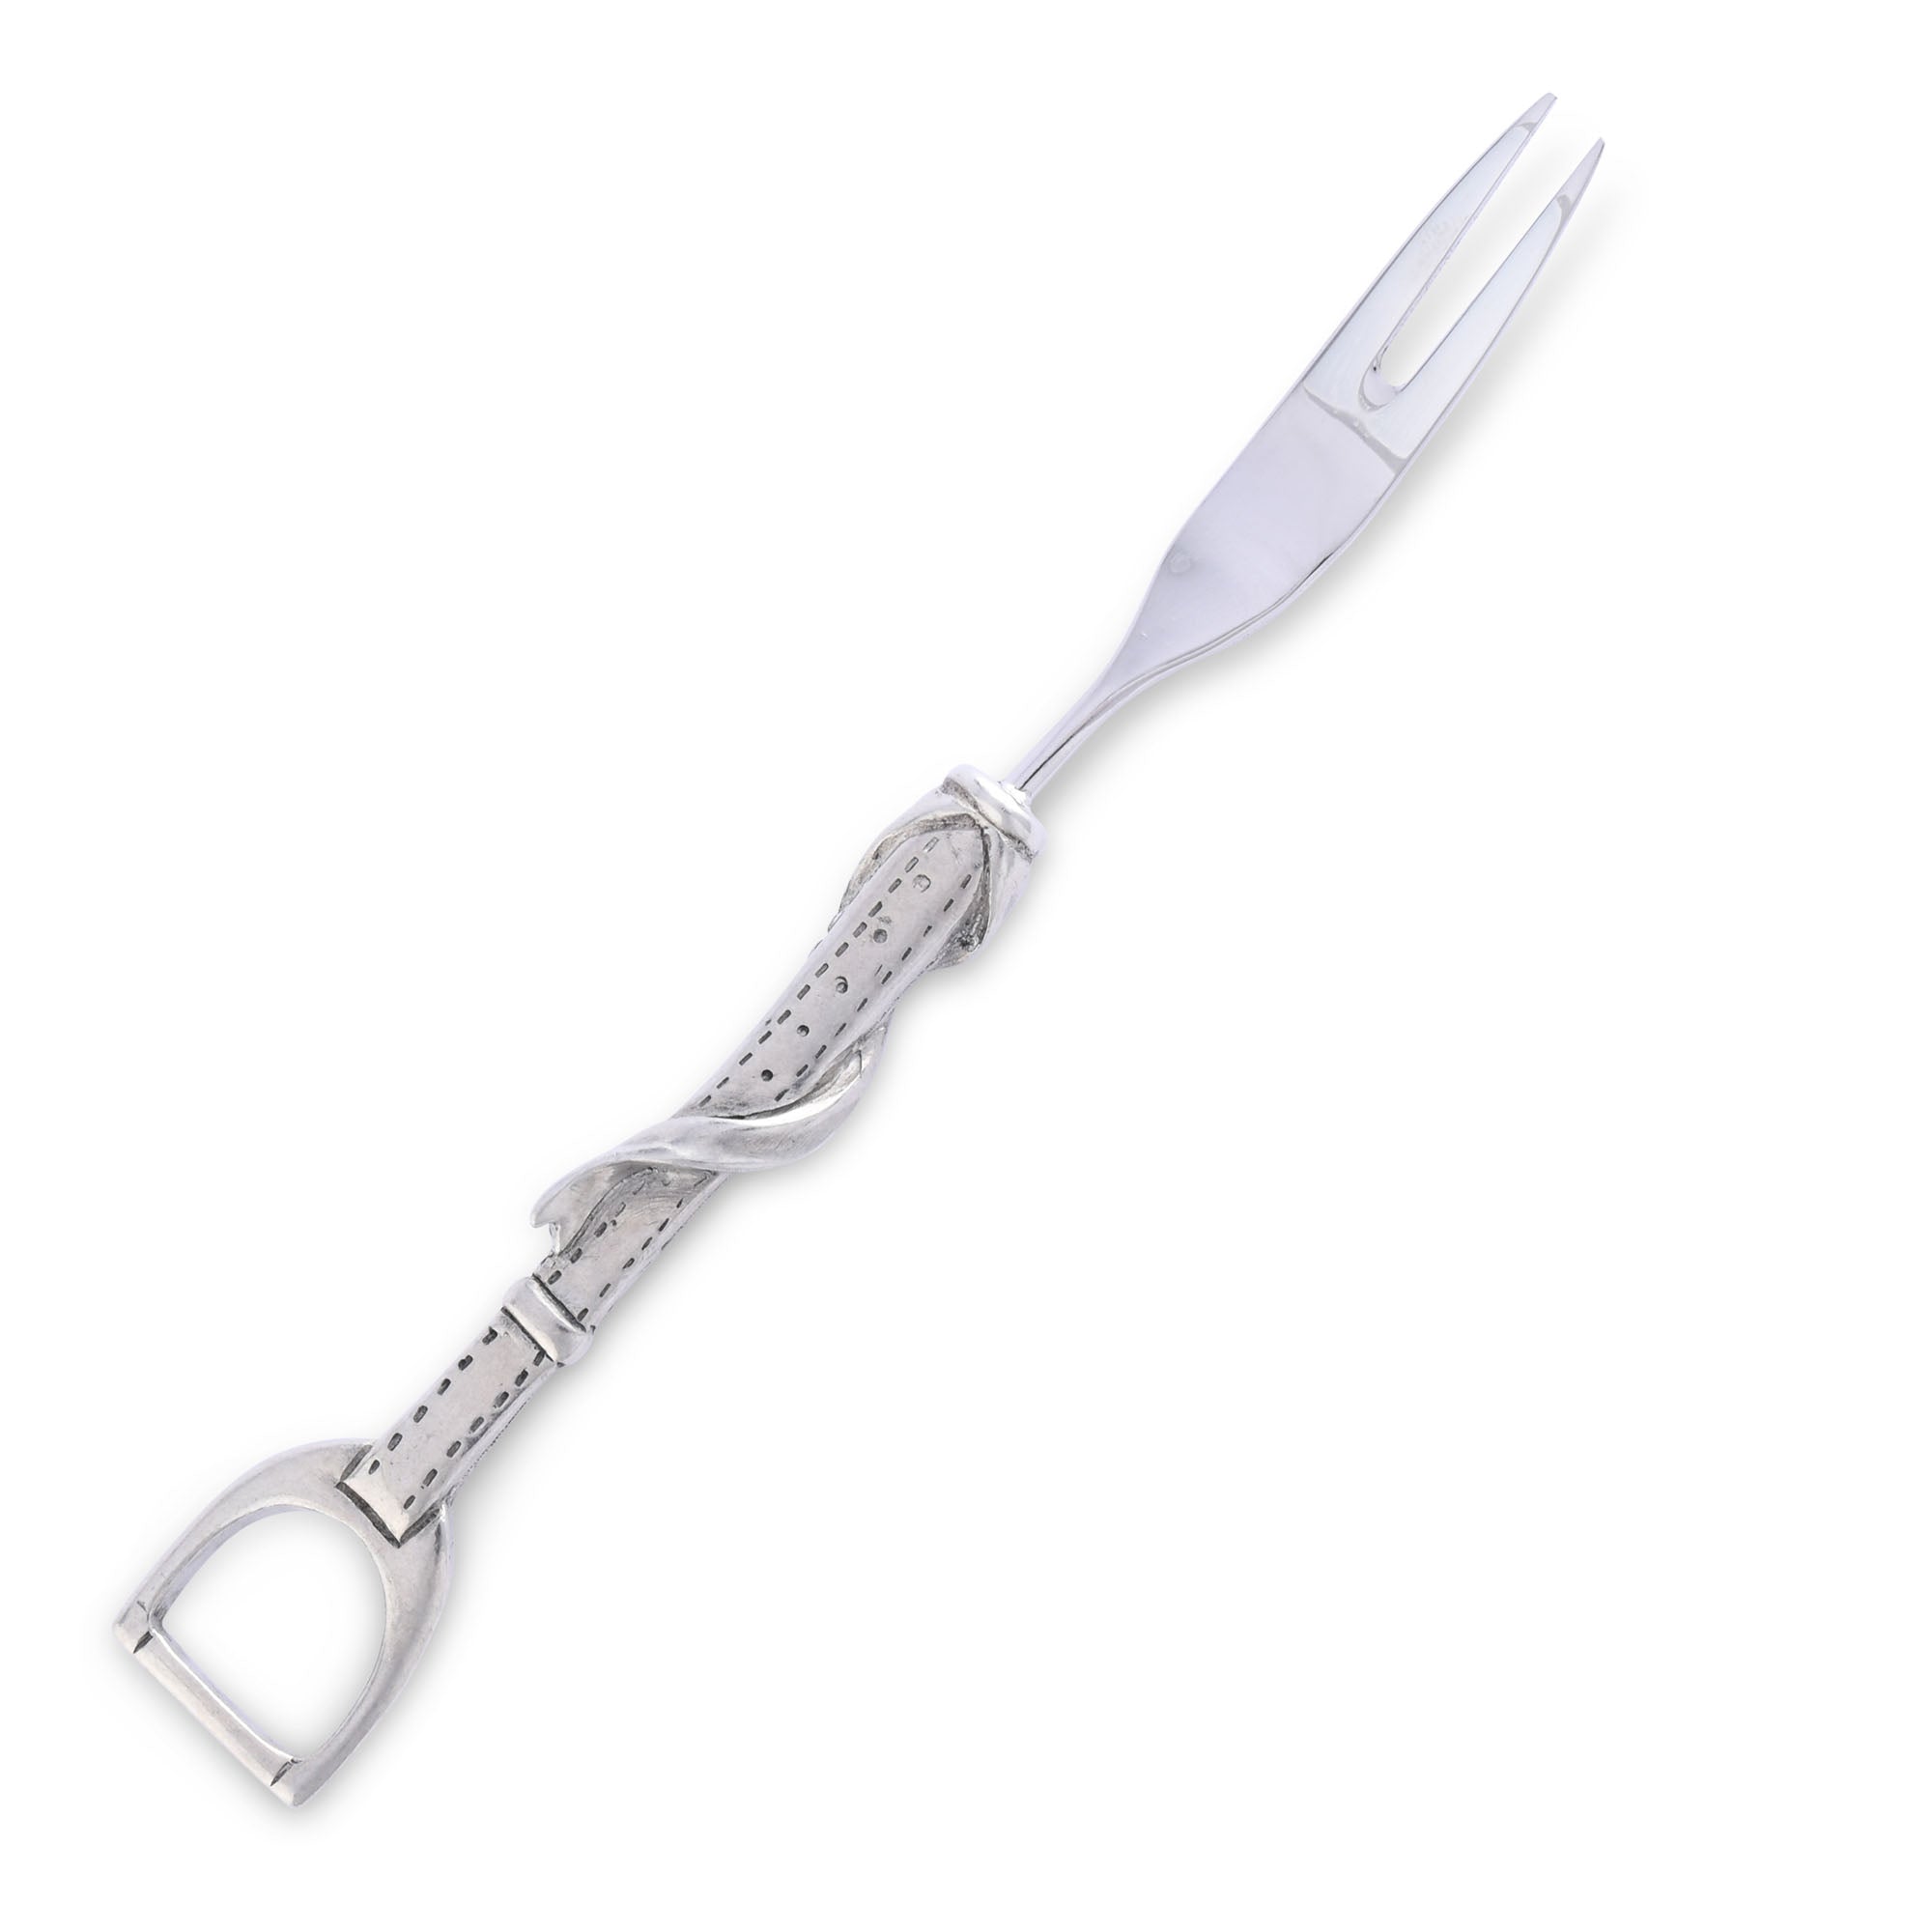 Vagabond House Stirrup Hors d oeuvre Fork Product Image